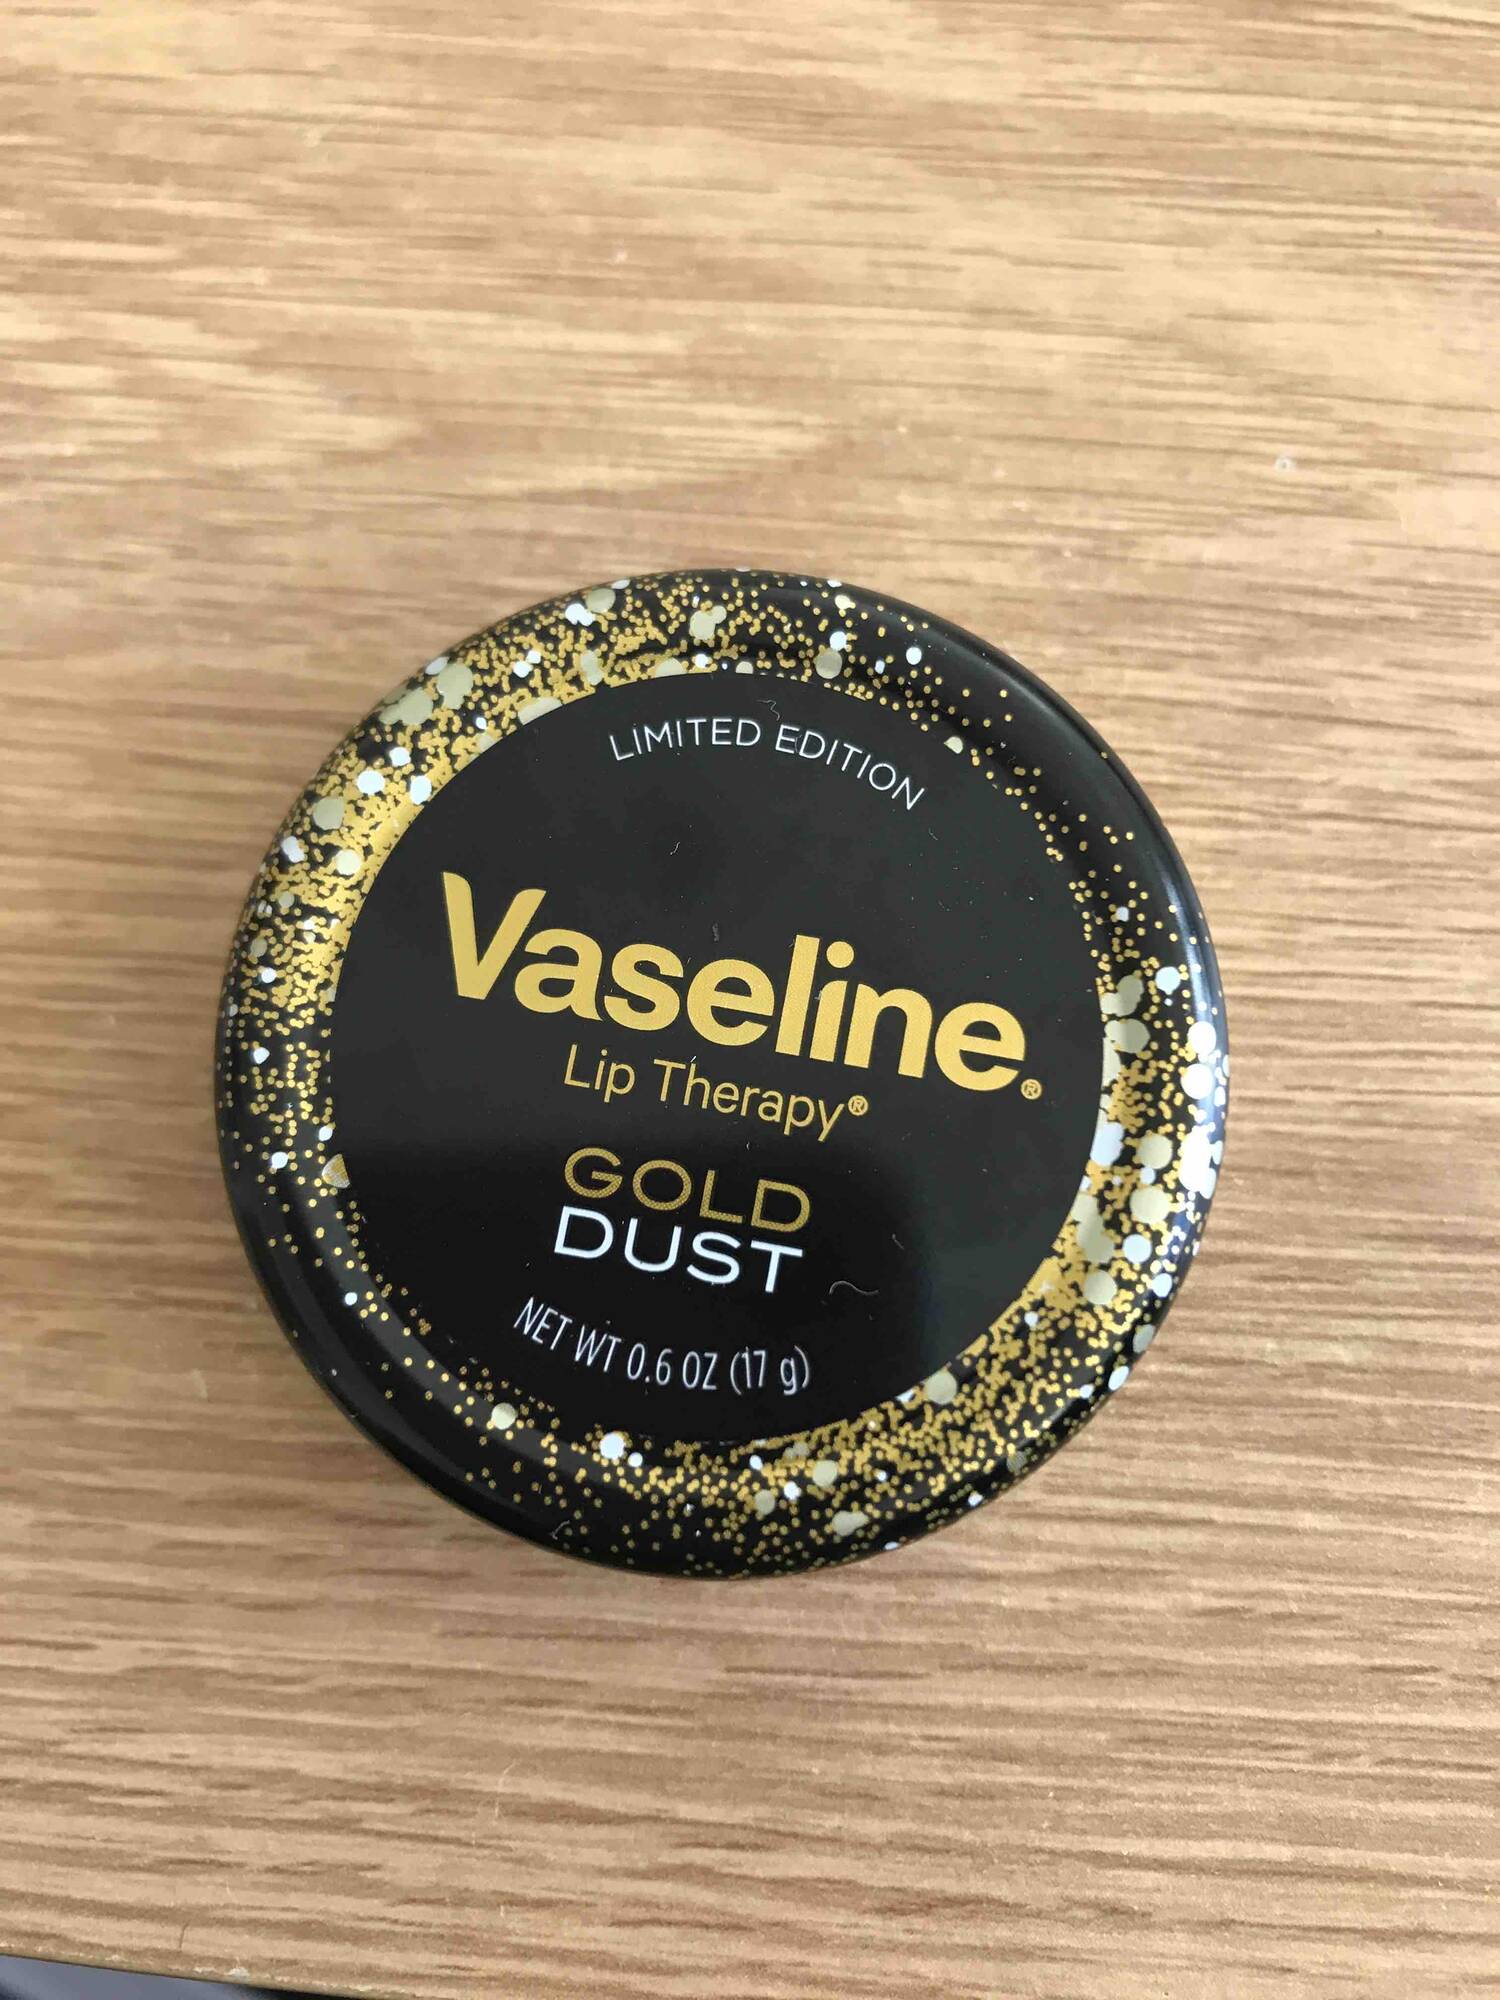 VASELINE - Gold dust - Lip therapy